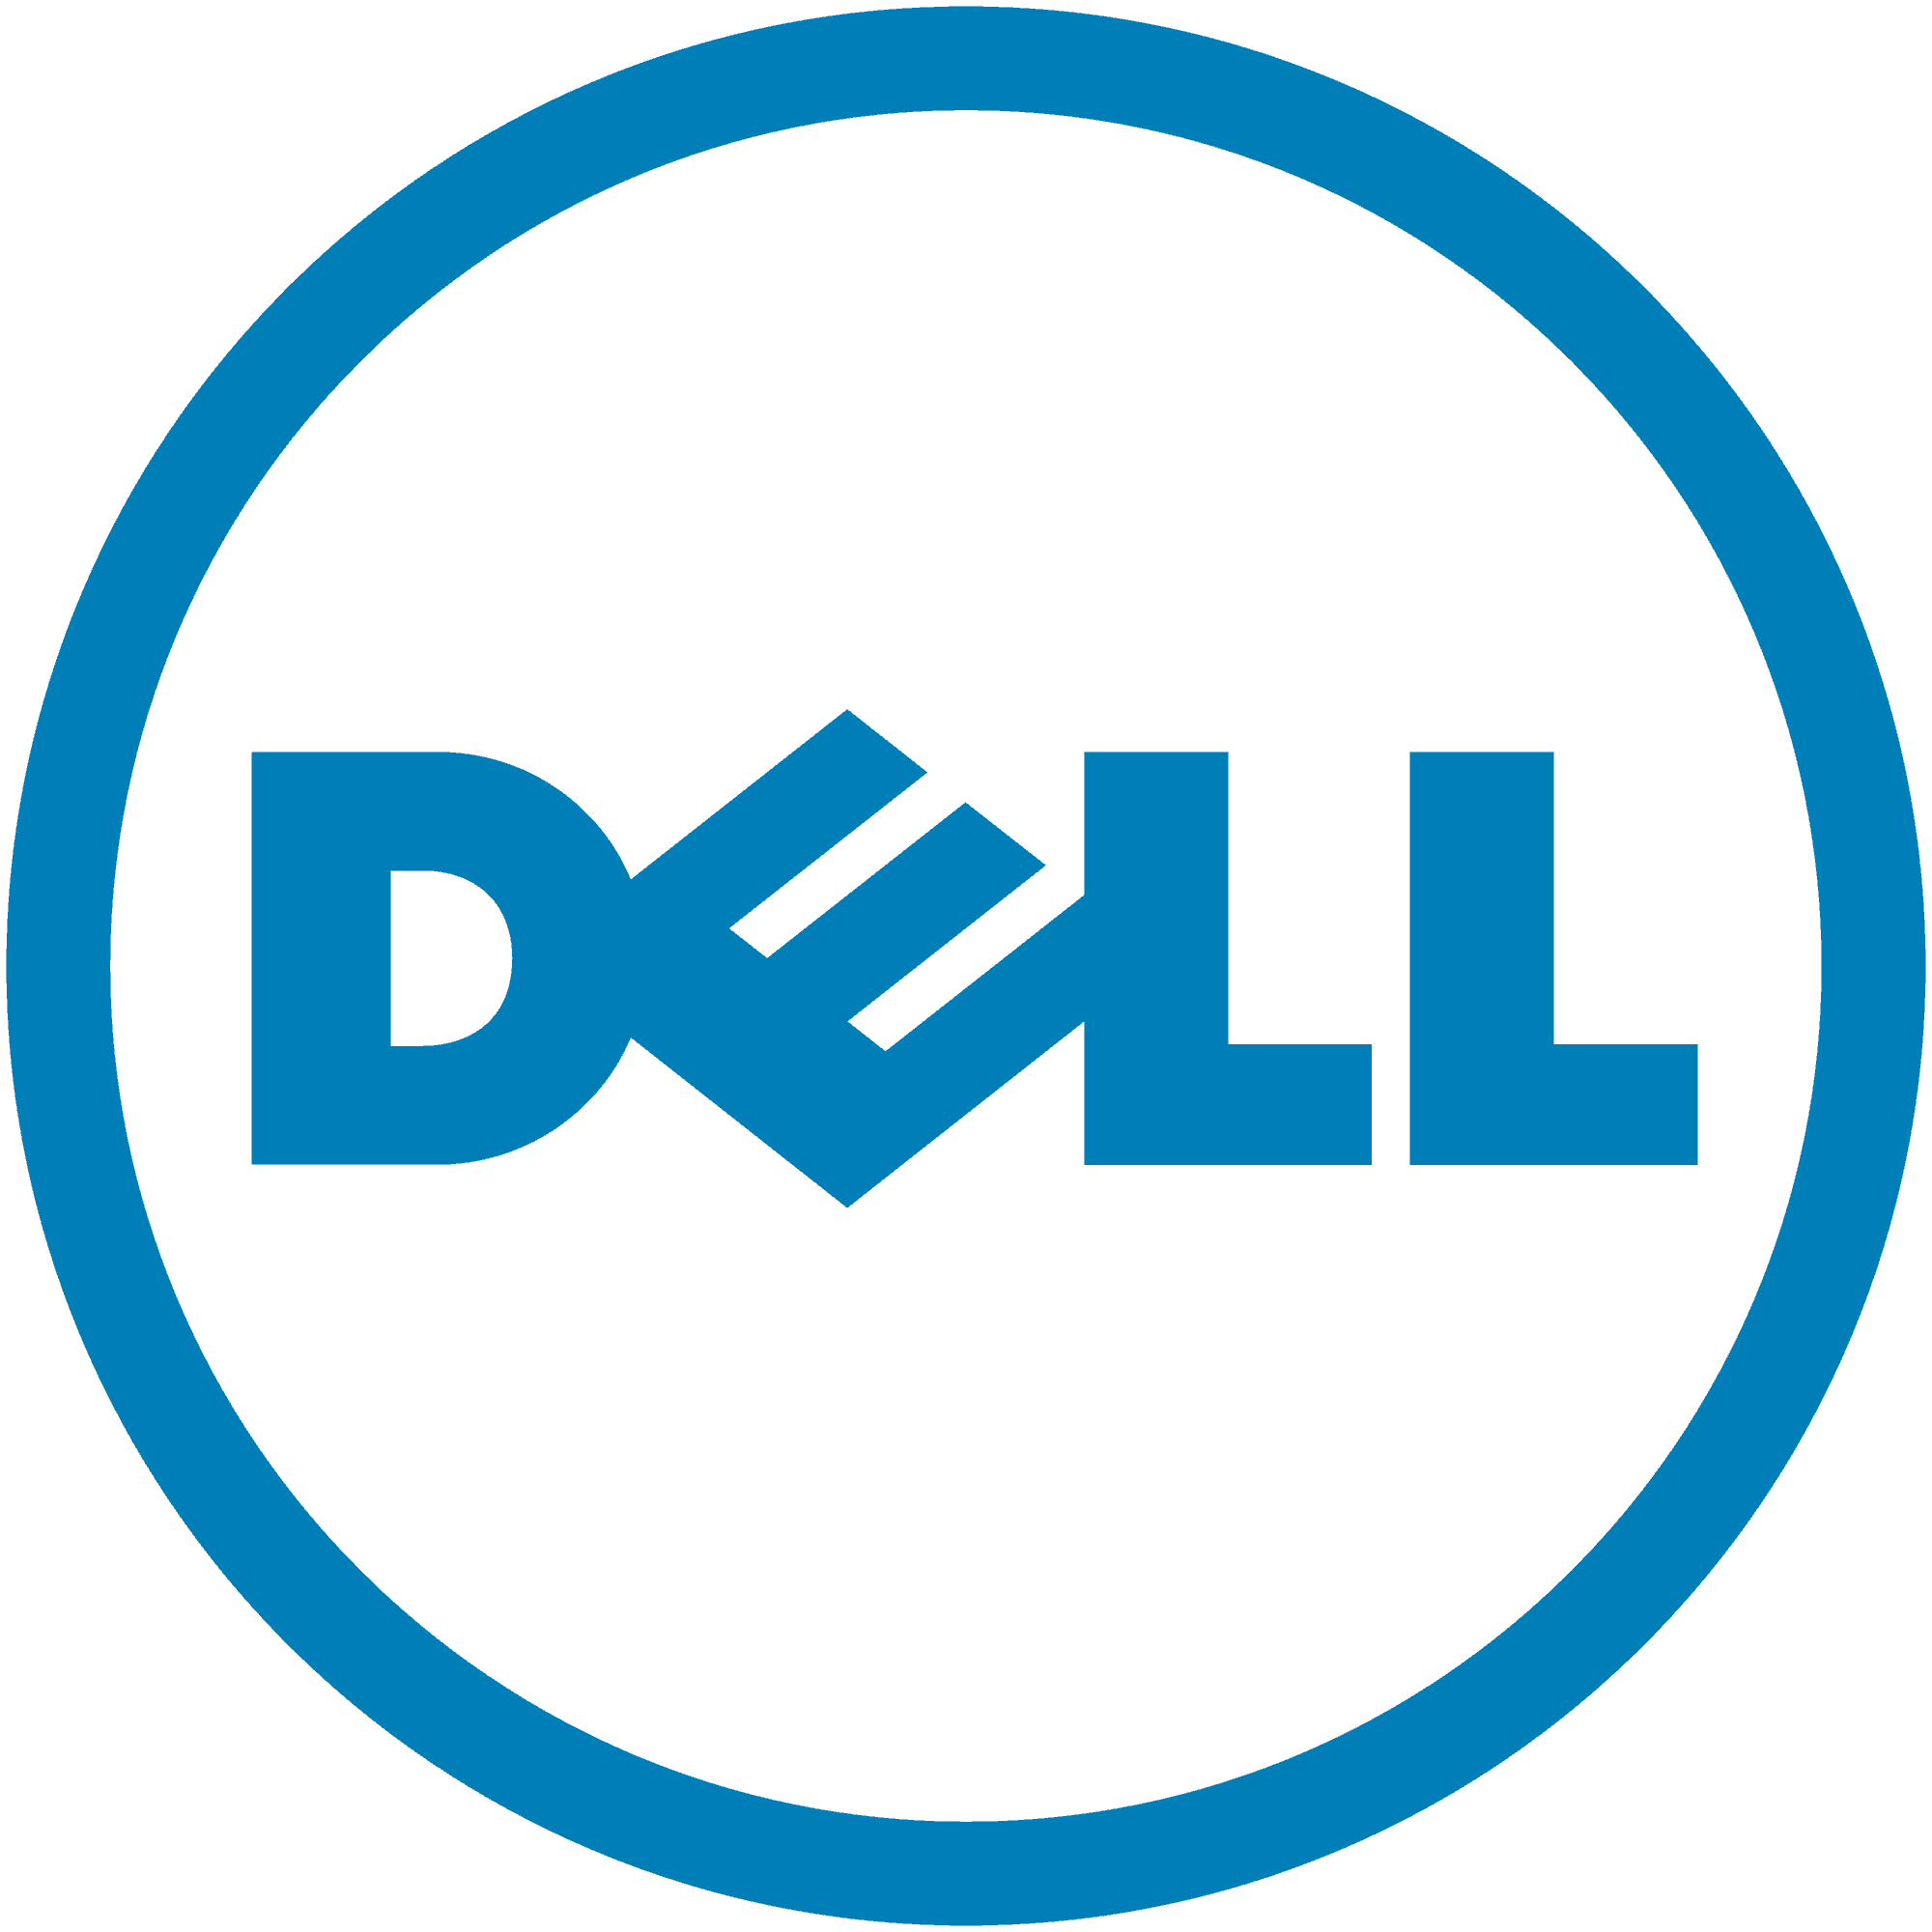 Dell logo displayed on a black background.